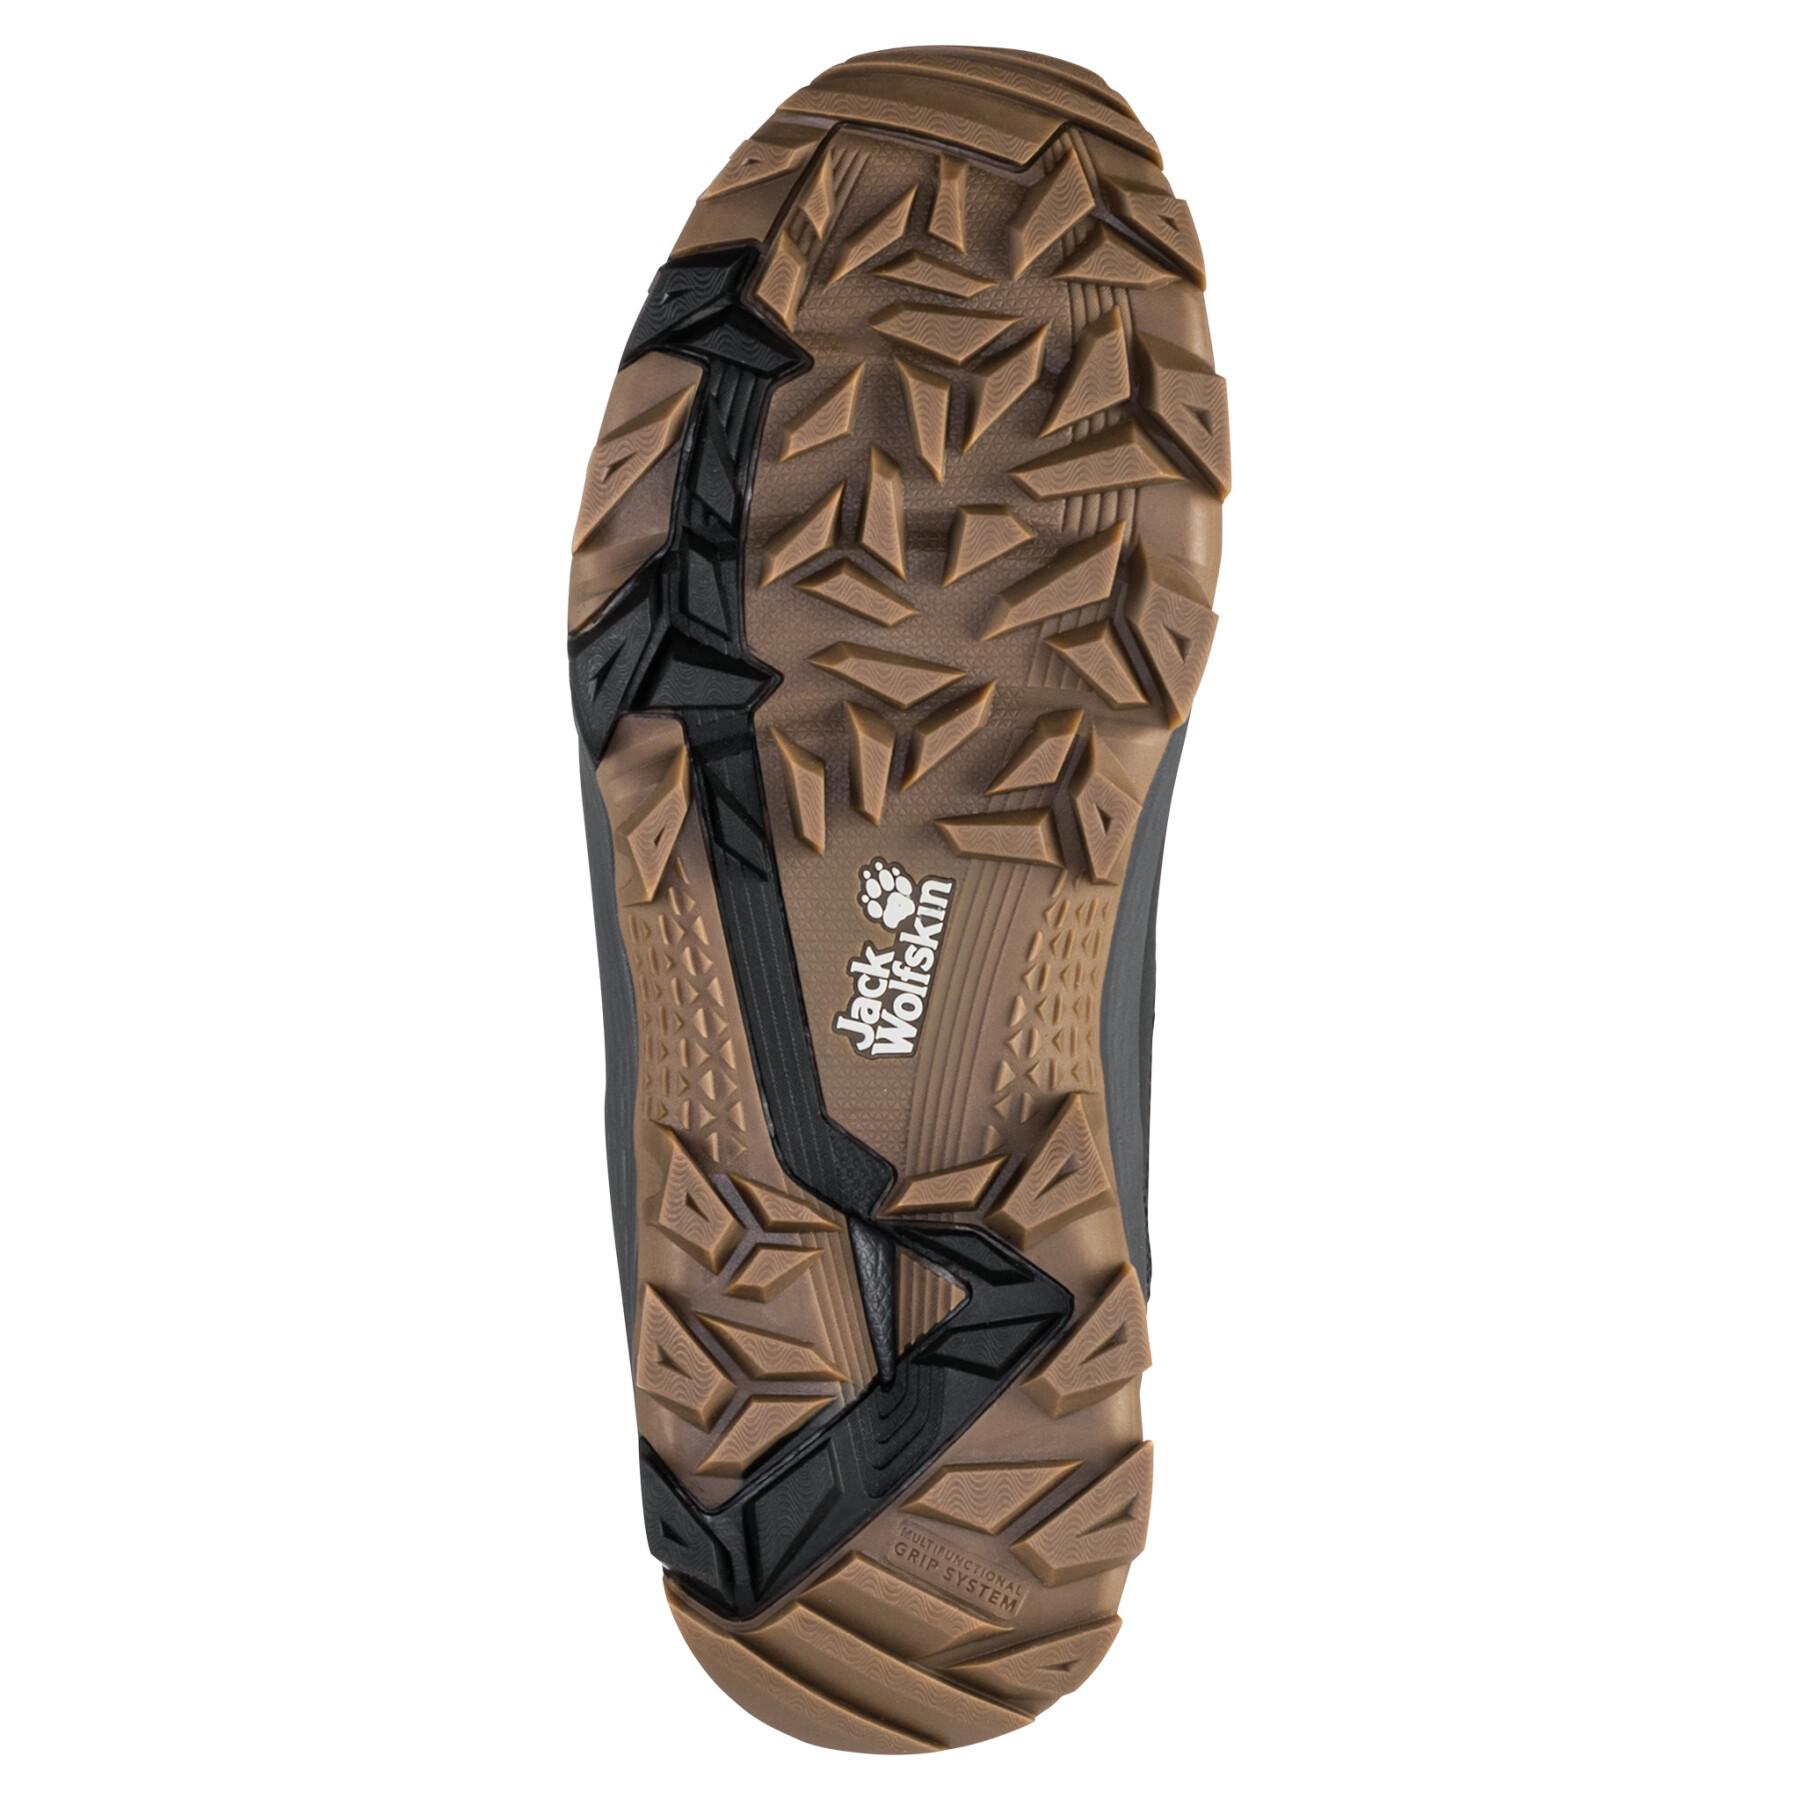 Hiking shoes Jack Wolfskin Everquest Texapore High